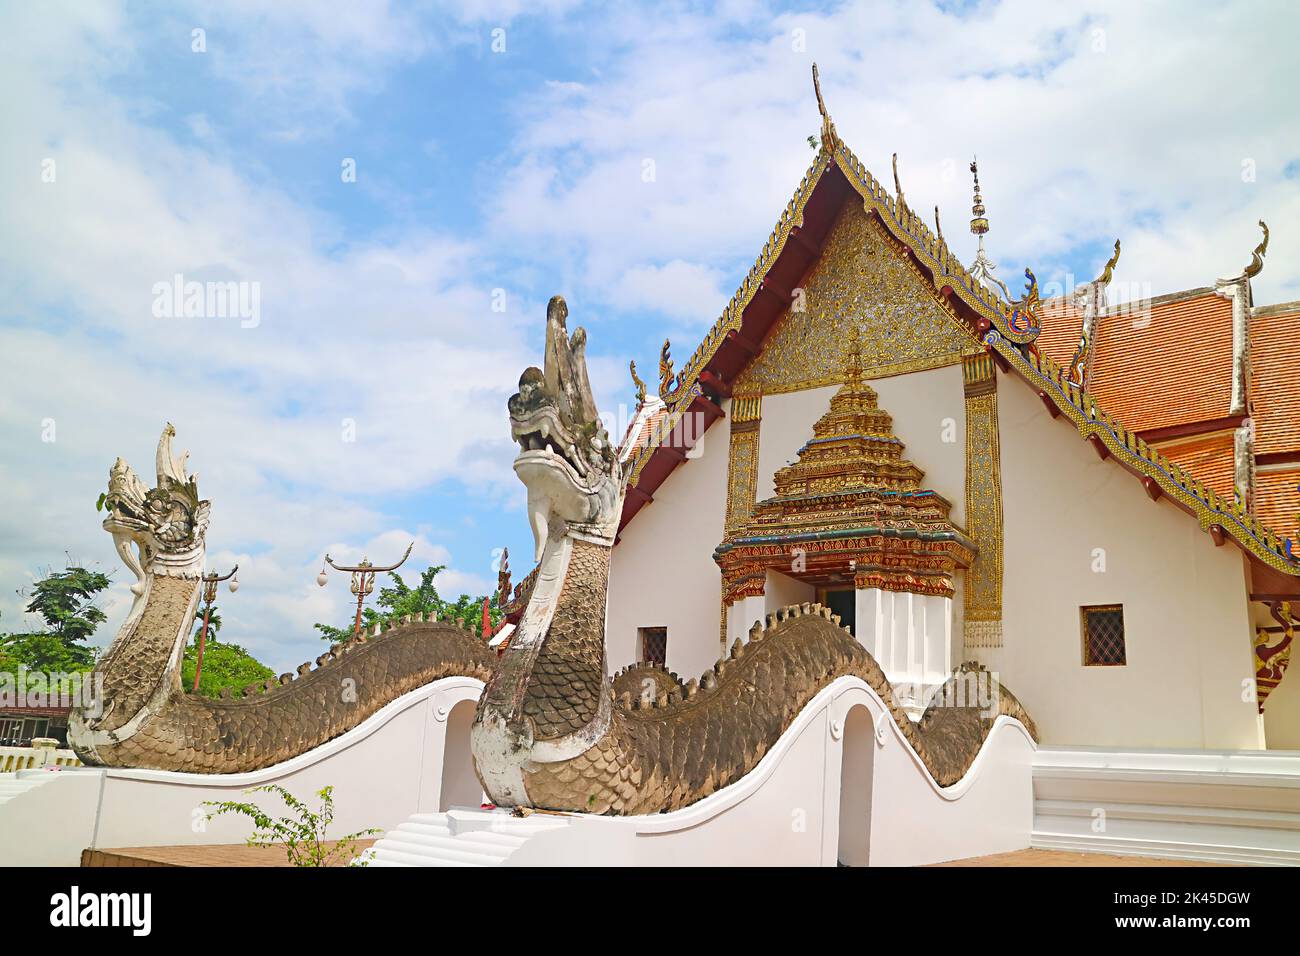 Wat Phumin Temple, which the Main Building Combines Ubosot and Wiharn (Worshiping Hall and Ordination Hall) Located in Nan Province, Thailand Stock Photo